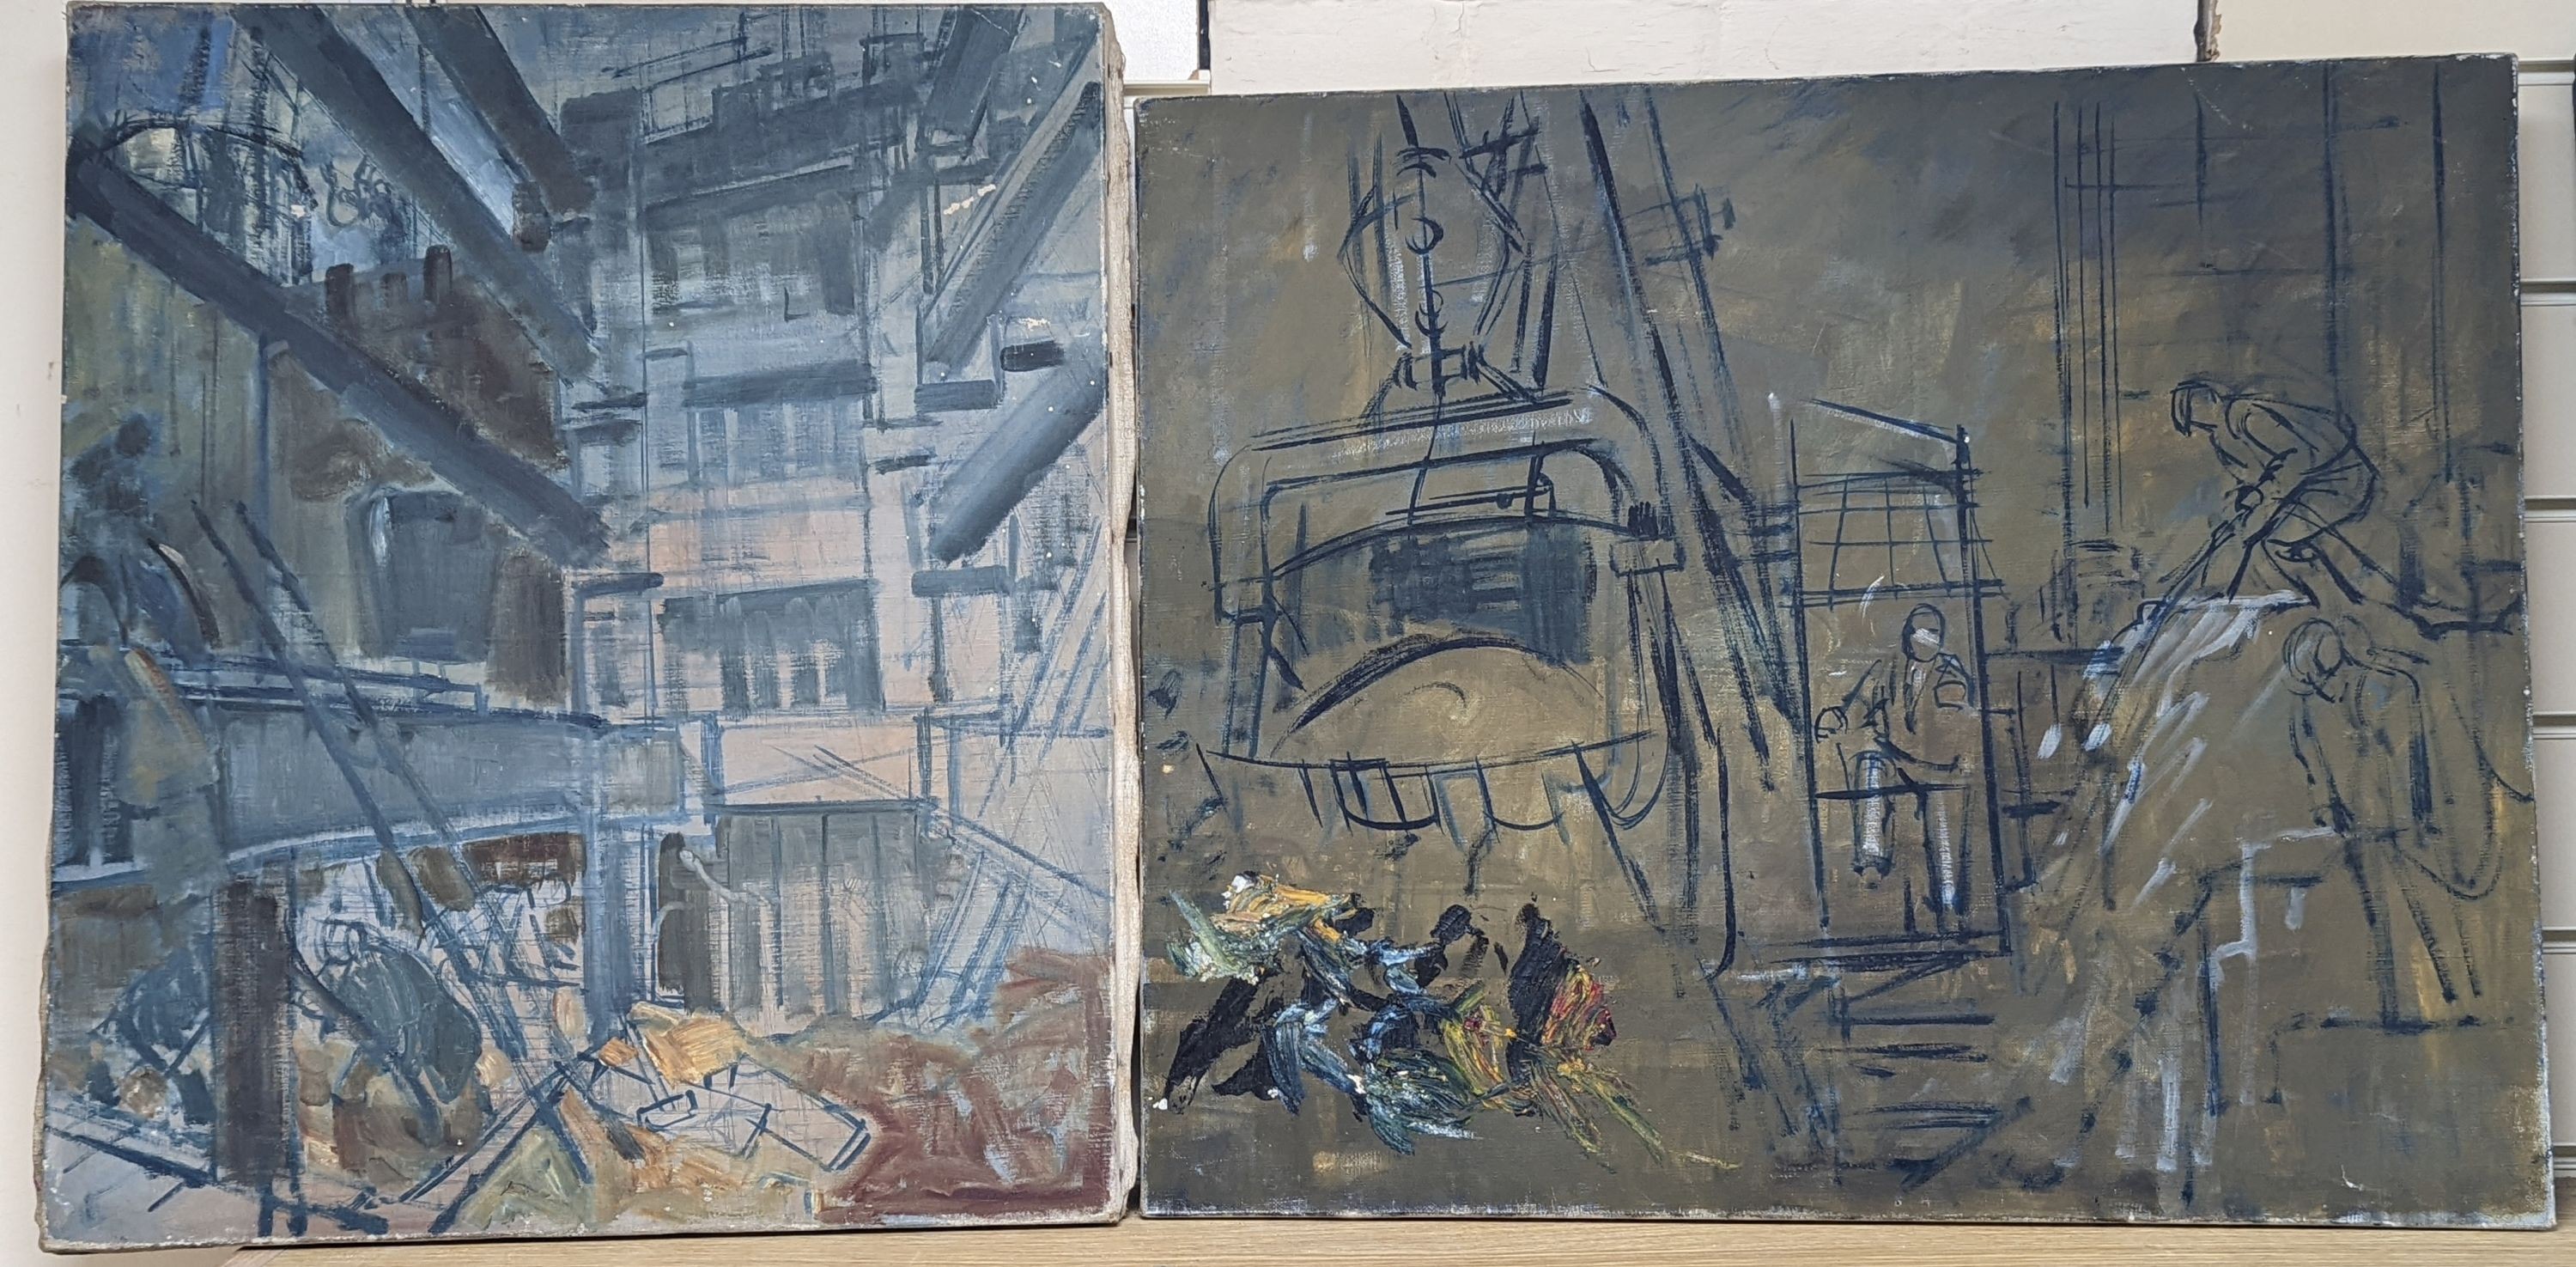 Henry James Neave (1911-1971), two unfinished oil on canvas sketches, Harbour scene and Construction workers, 51 x 61cm and 55 x 46cm, both unframed